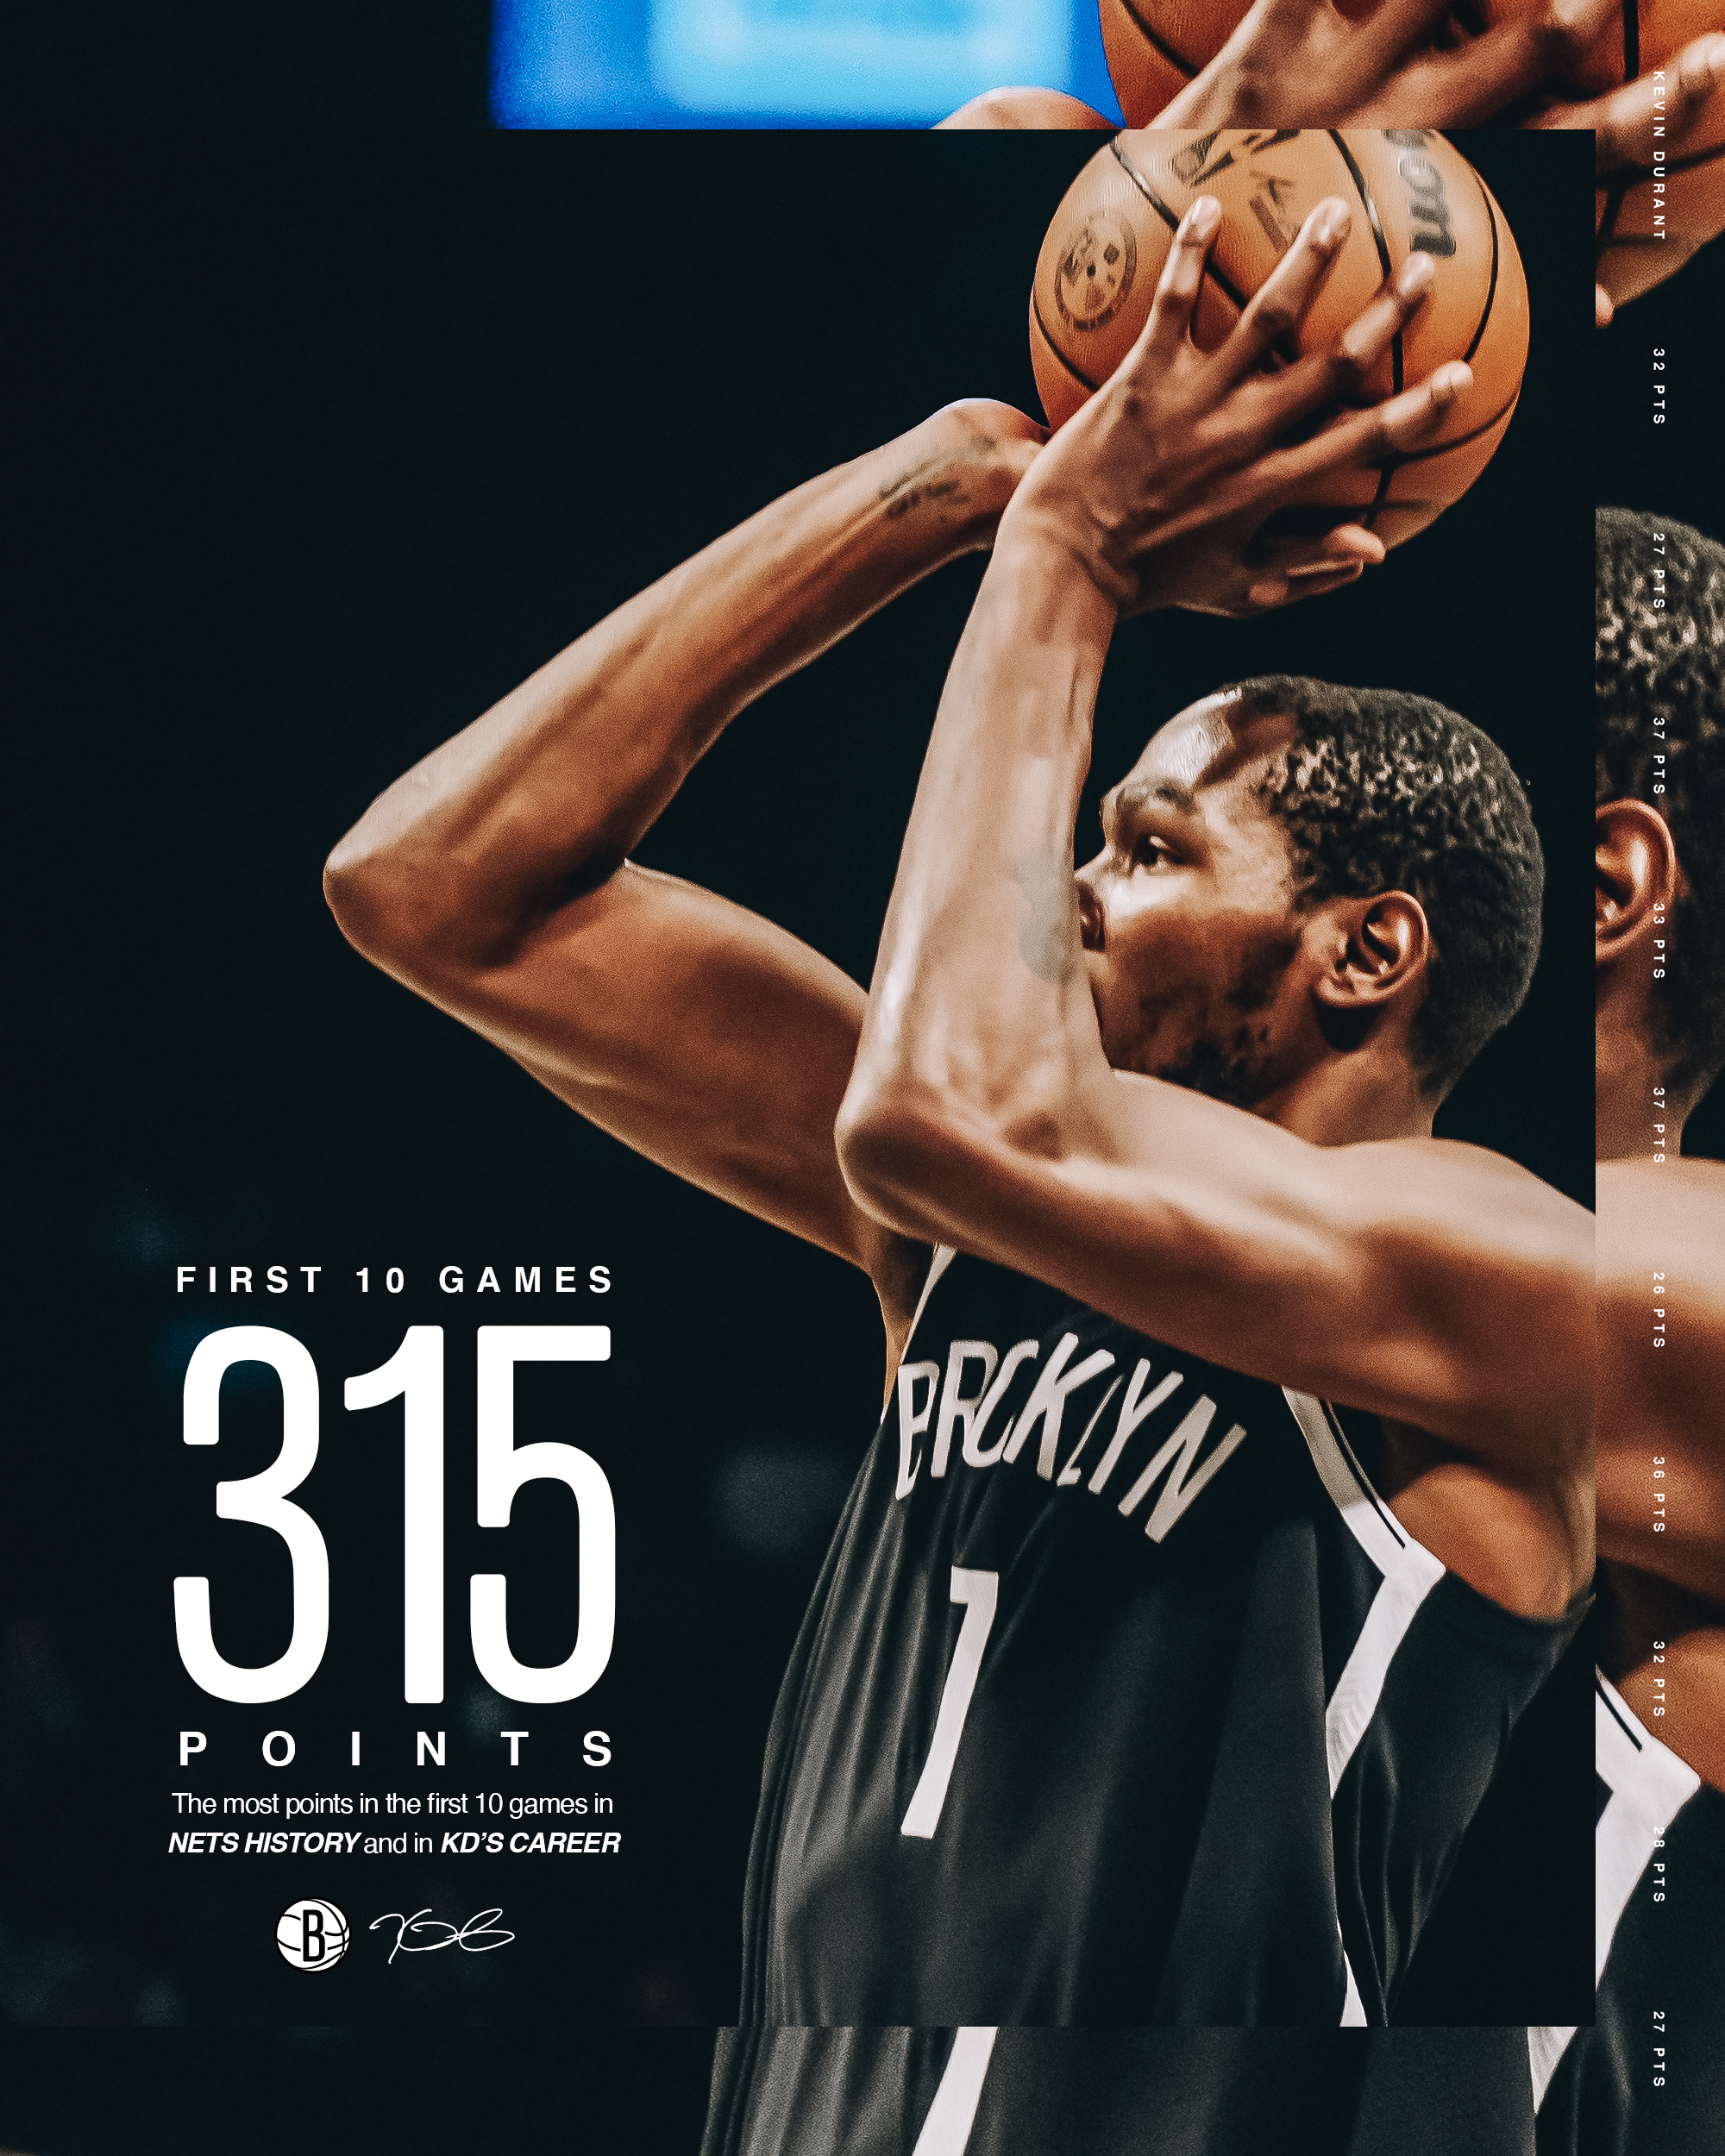 Nets 22-23 season preview: 10 years in BK, Ben10, and 10 questions